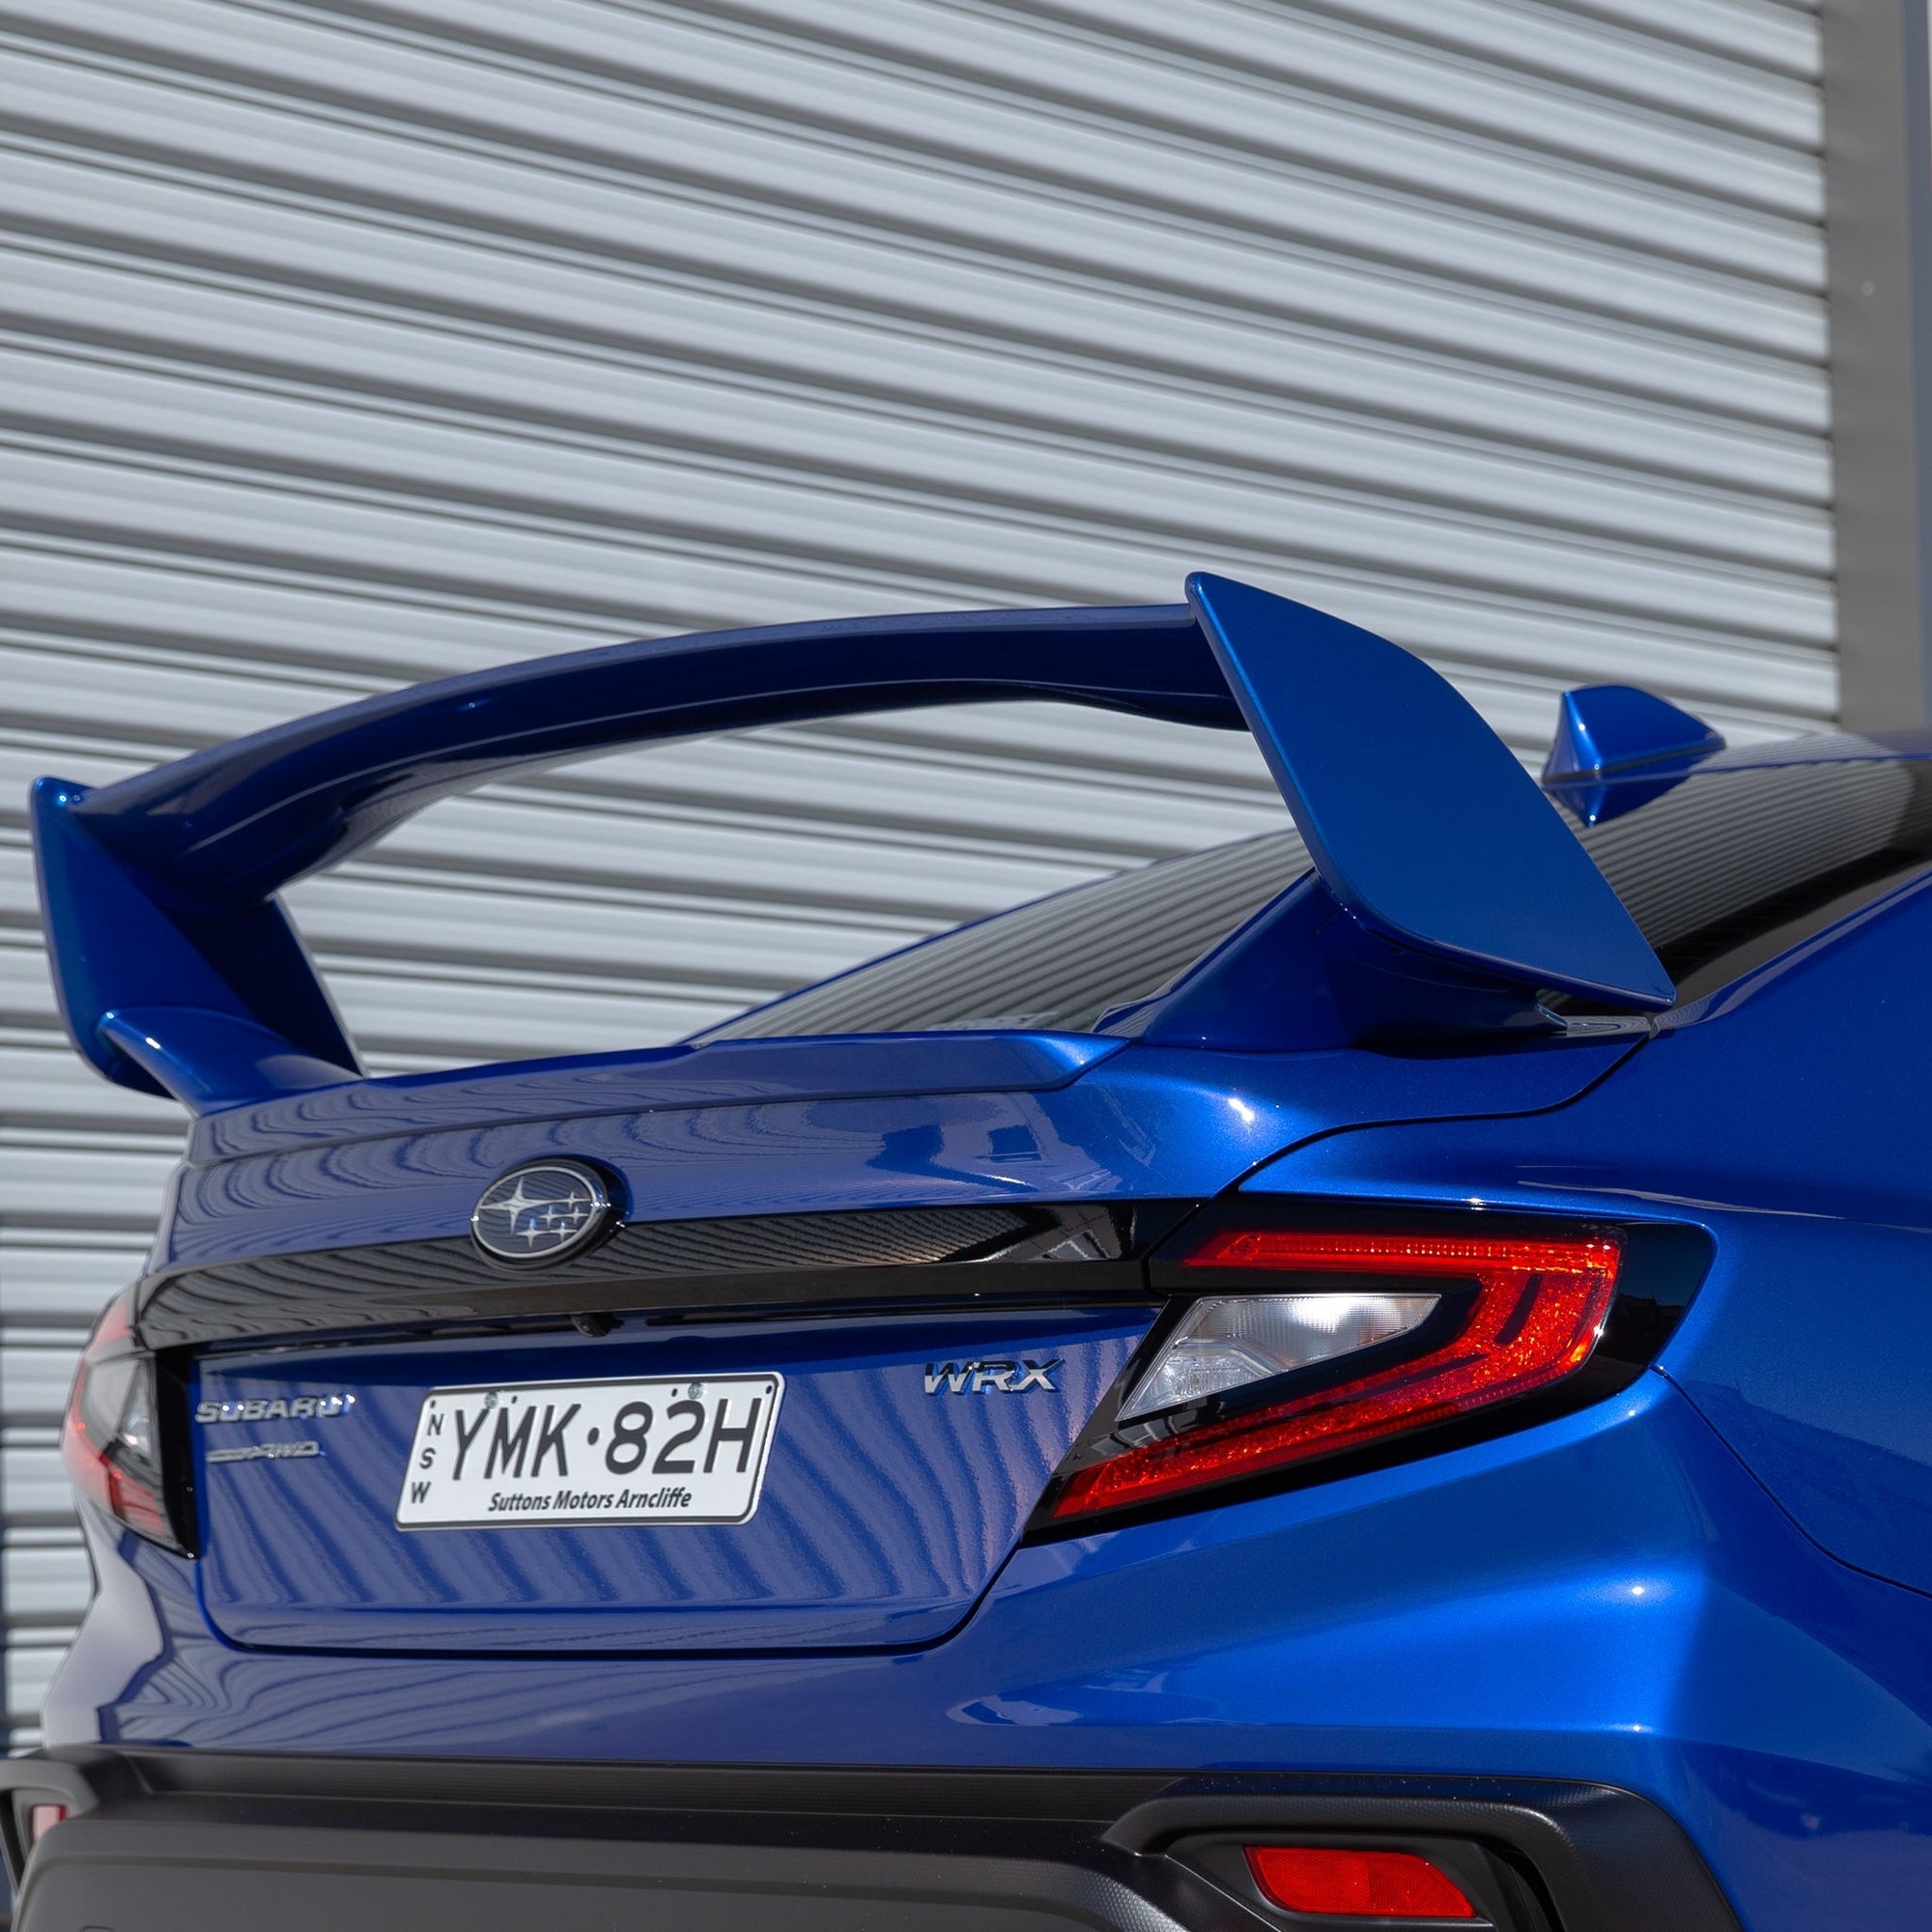 DMAKER STI-Spec Wing Spoiler For 2022+ Subaru WRX VB [Paint Matched] World Rally Blue Pearl - K7X